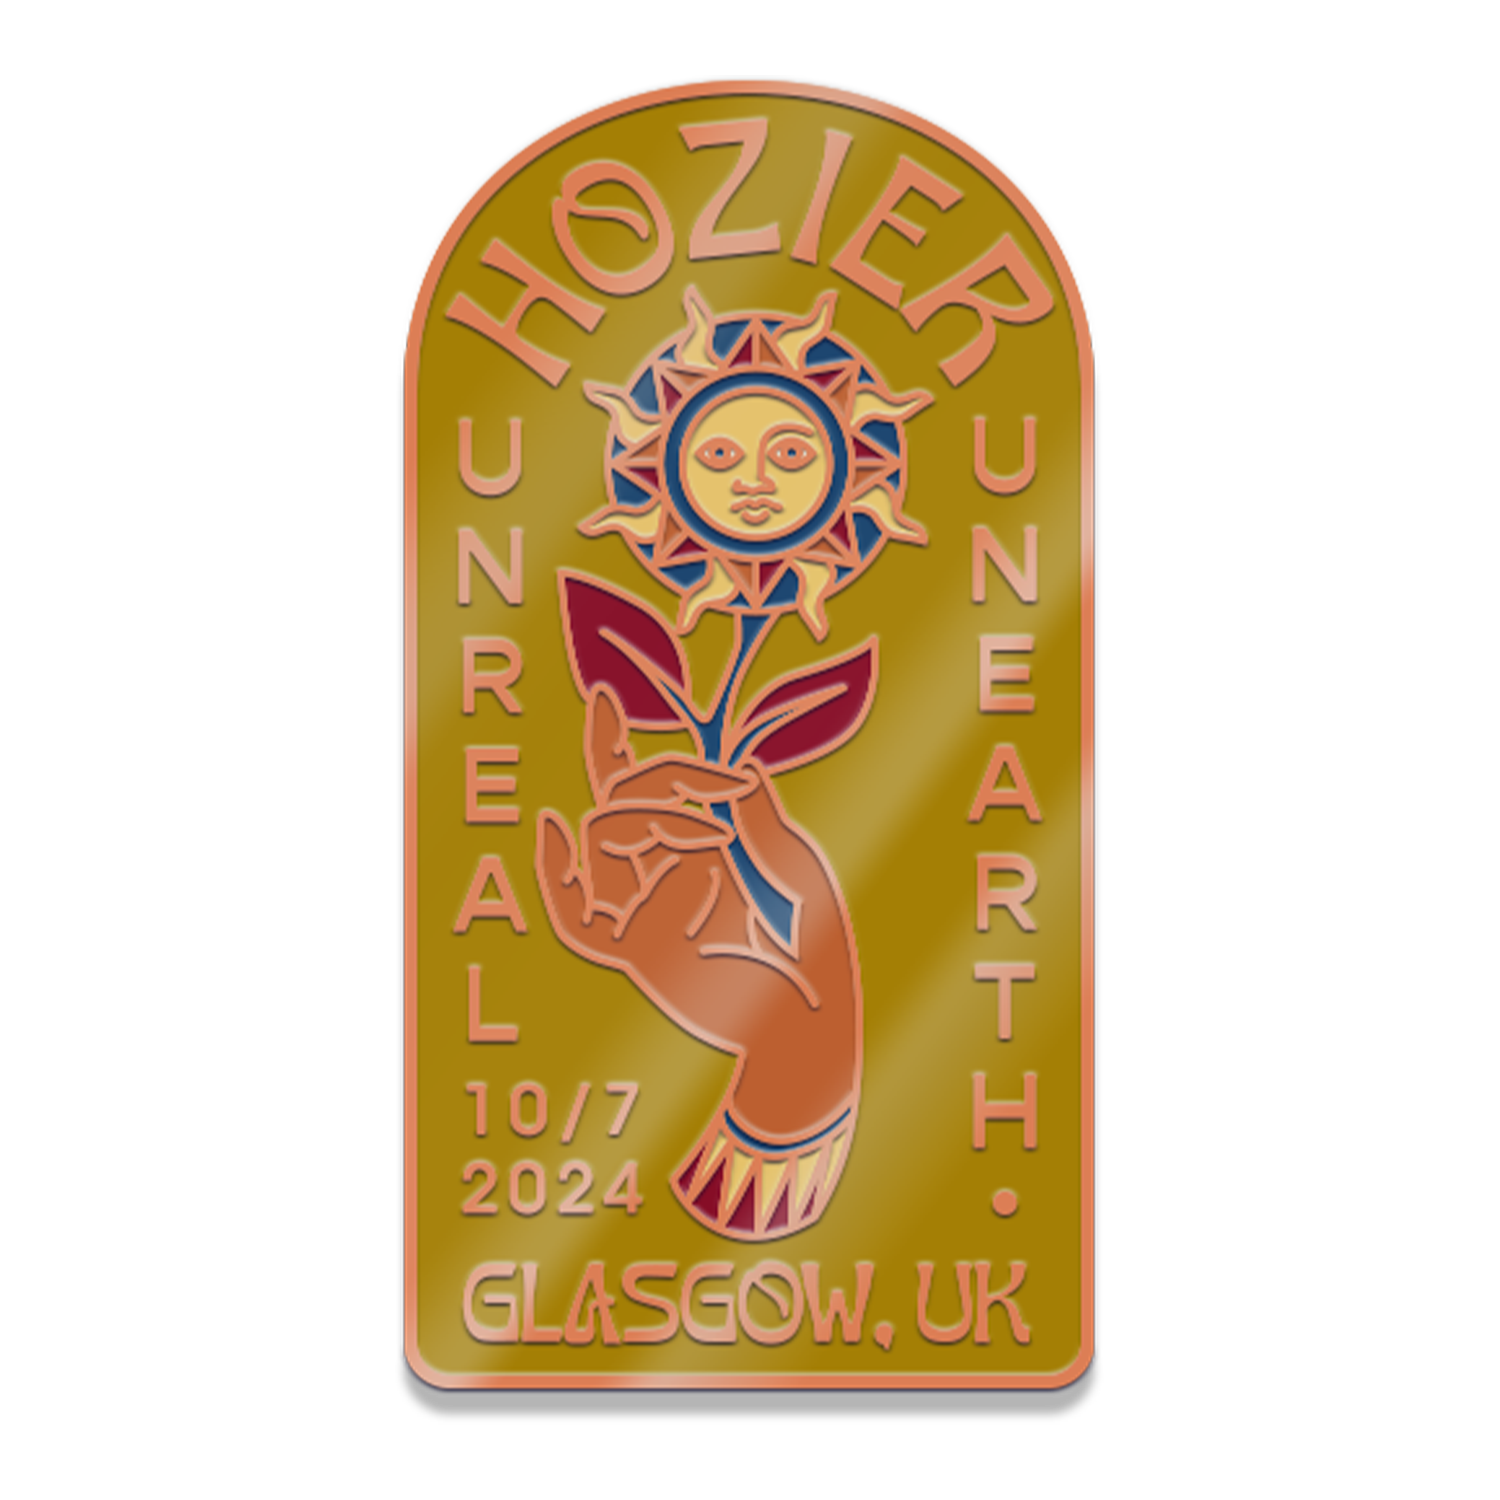 Hozier - Glasgow Event Pin